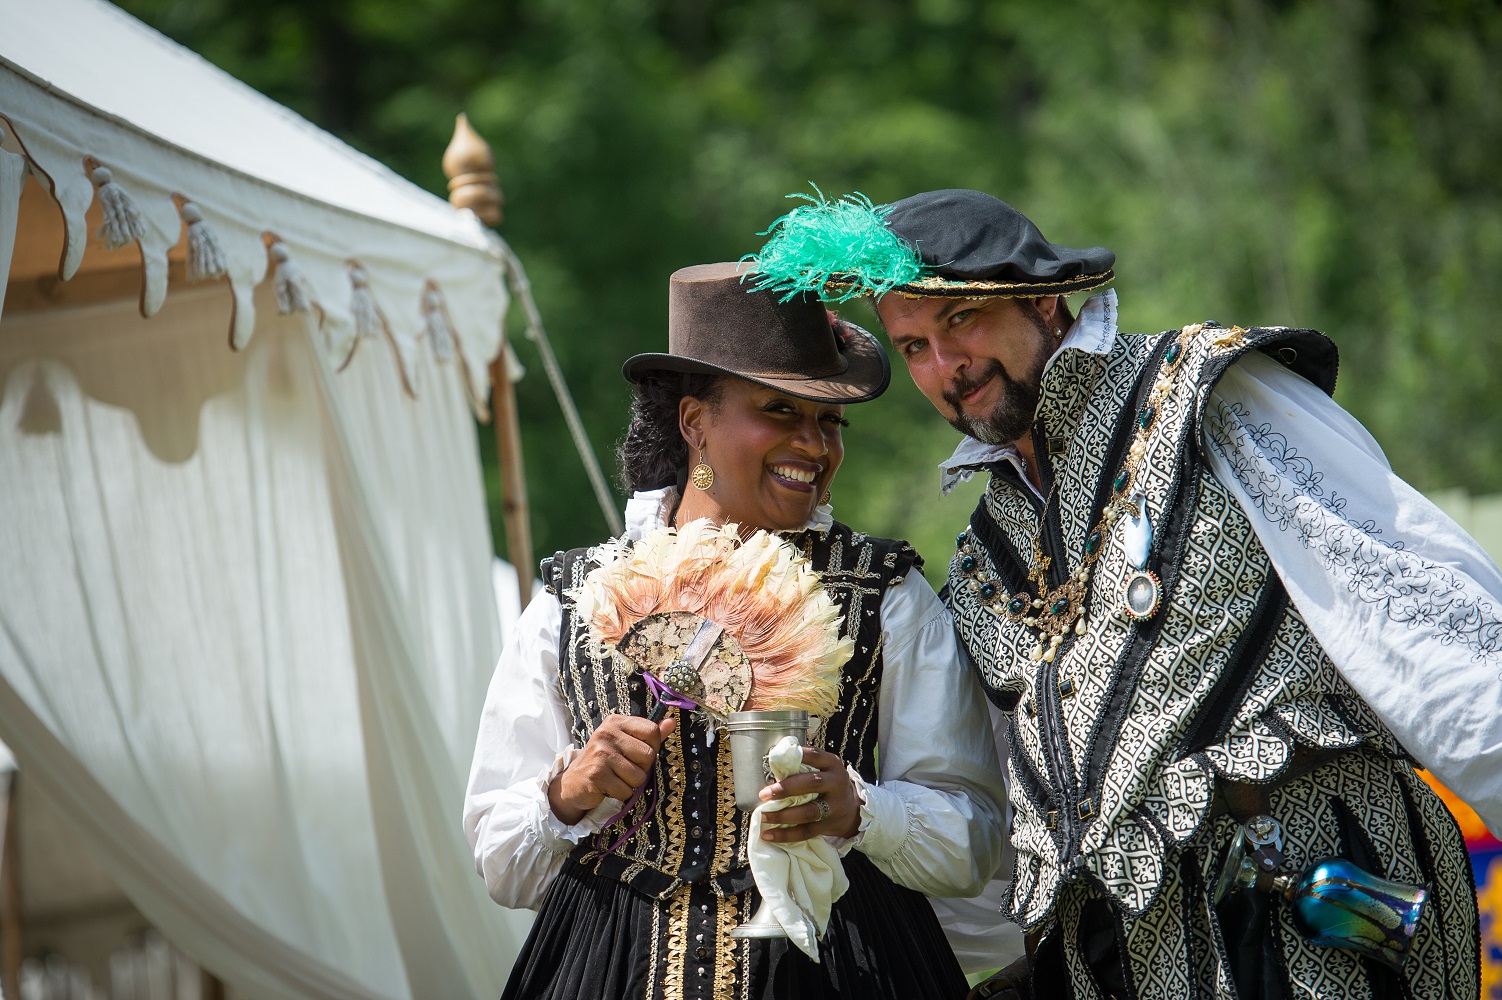 10 Things to Love about the New York Renaissance Faire Journeys Near